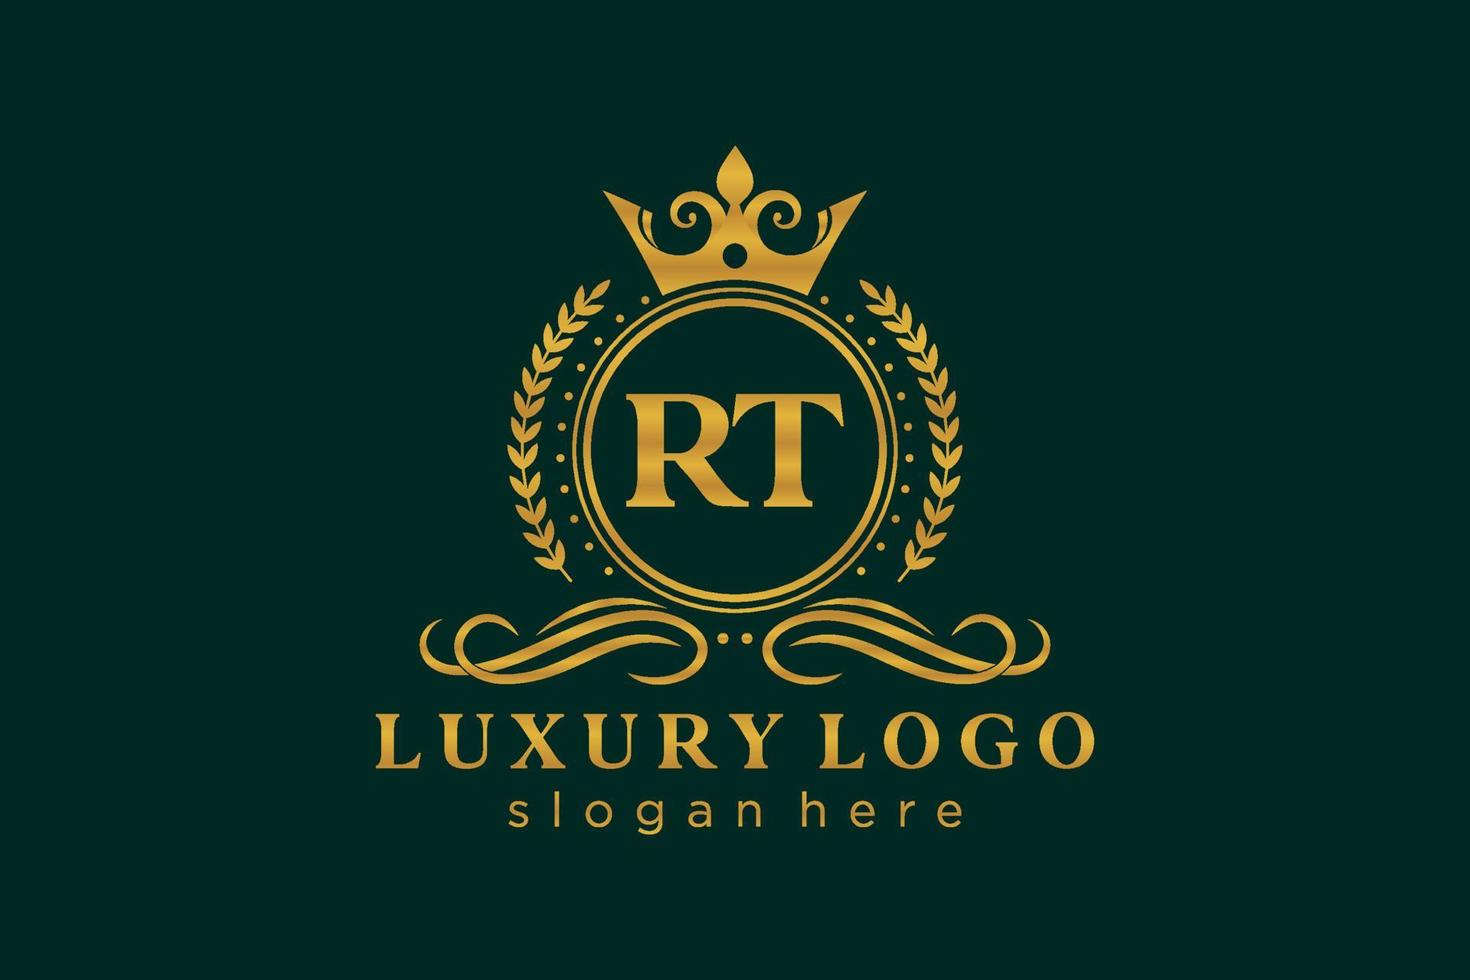 Initial RT Letter Royal Luxury Logo template in vector art for Restaurant, Royalty, Boutique, Cafe, Hotel, Heraldic, Jewelry, Fashion and other vector illustration.